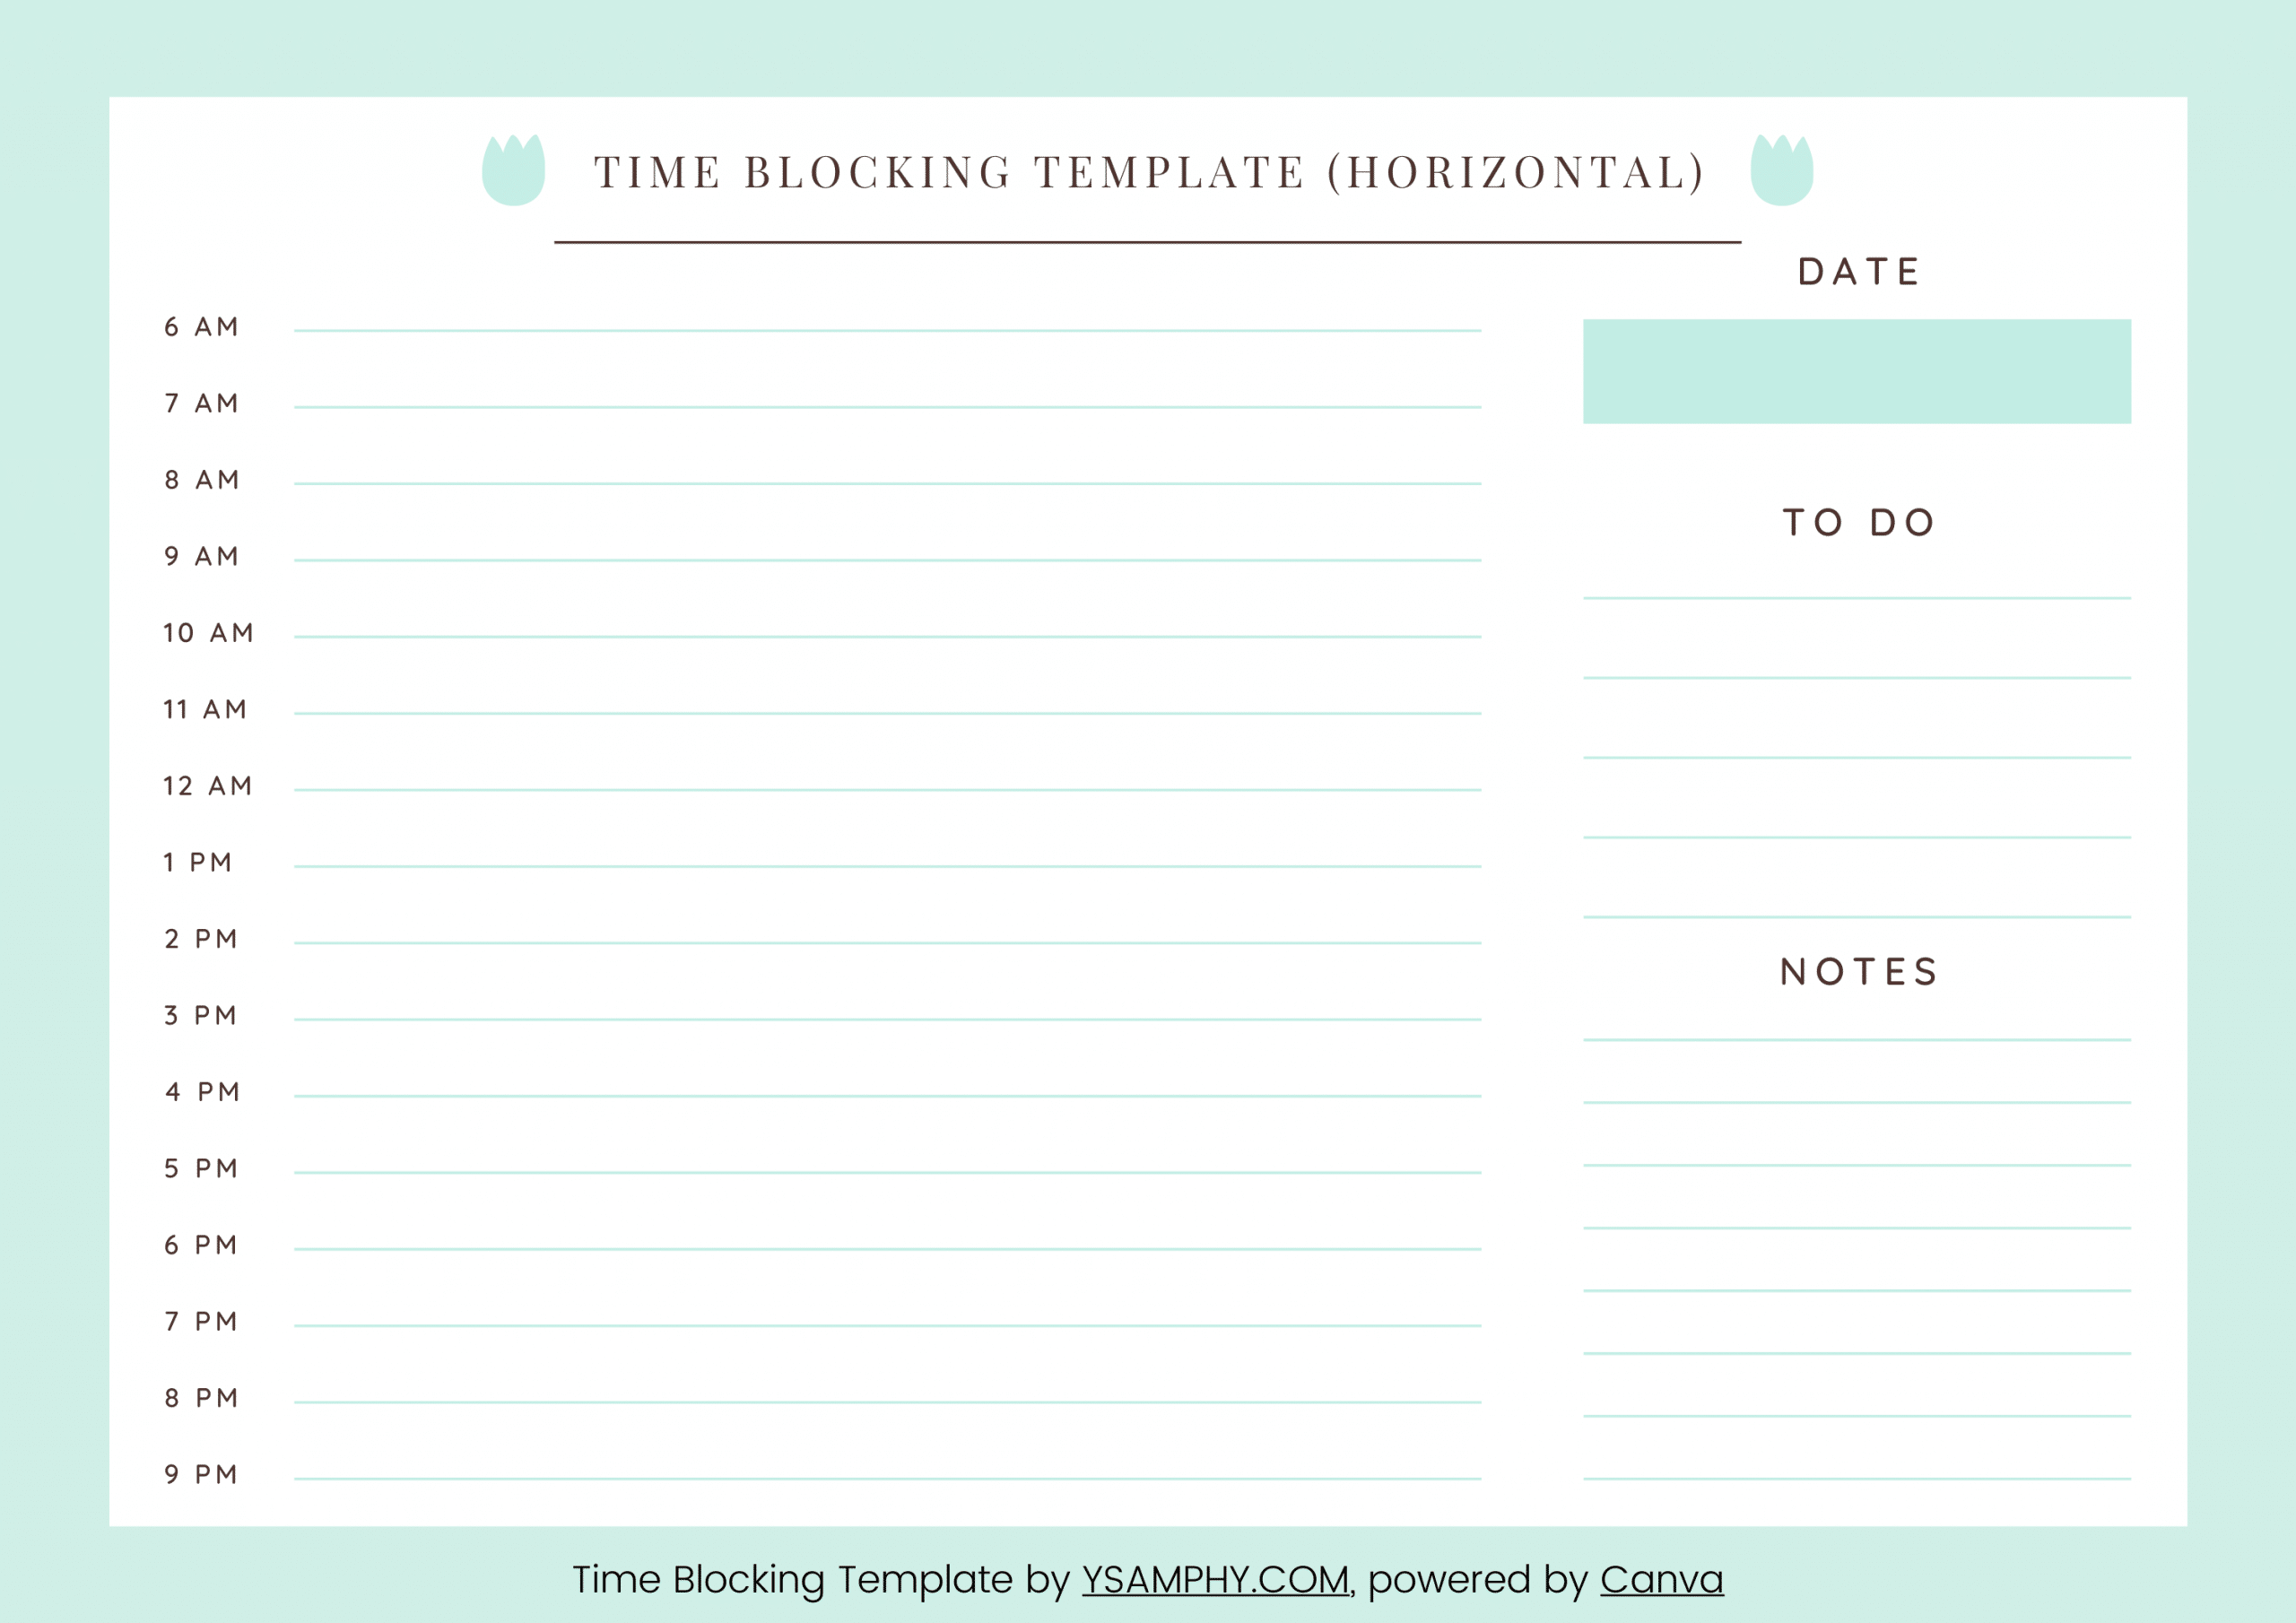 black calendar template for blocking time in a day 28